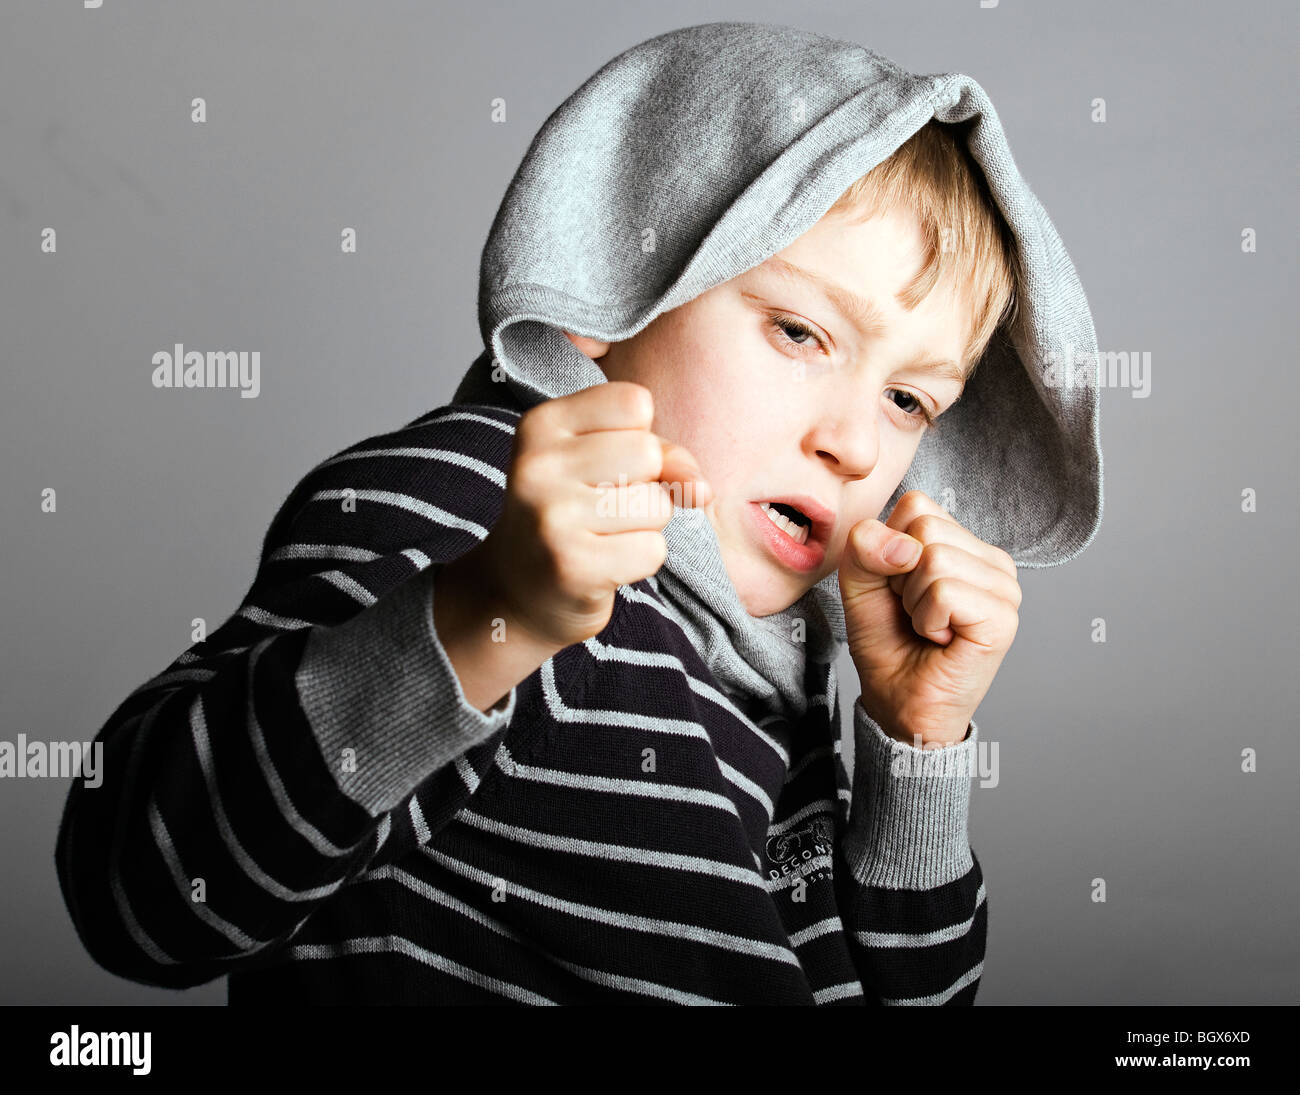 a young blonde street child fights for survival Stock Photo